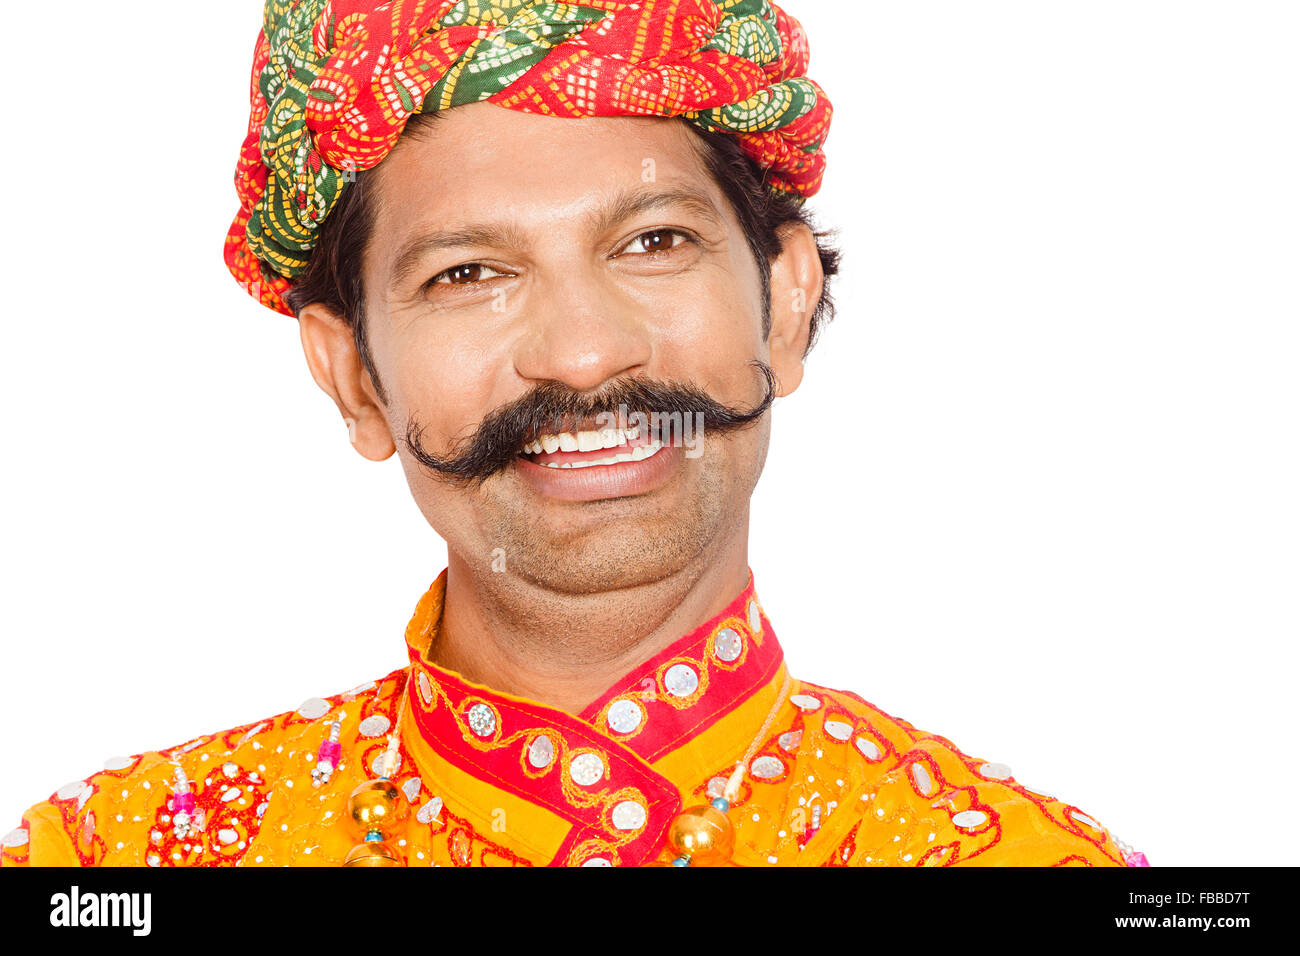 1 indian Rural Gujrati Villager face smiling Stock Photo